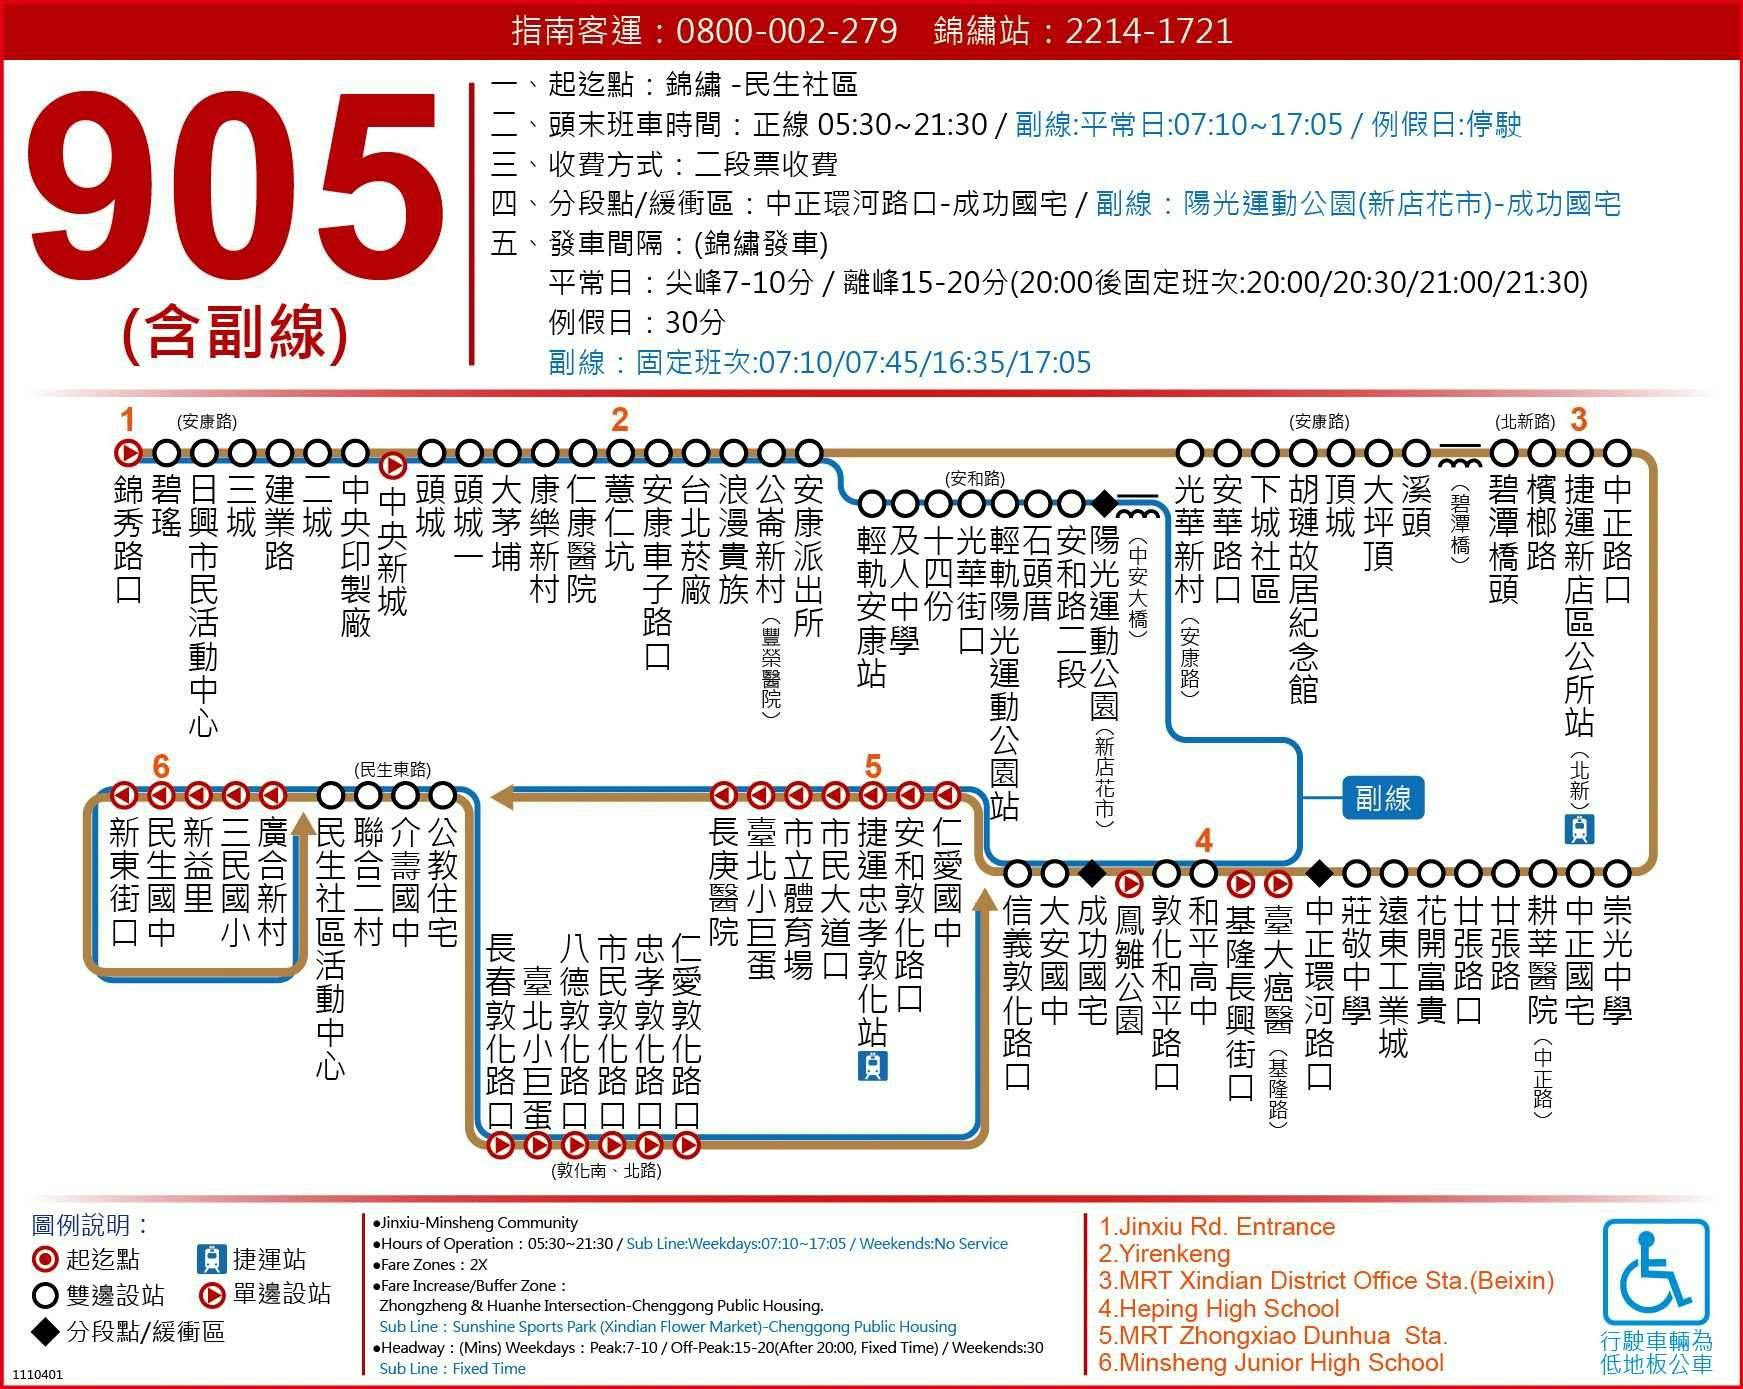 905Route Map-台北市 Bus